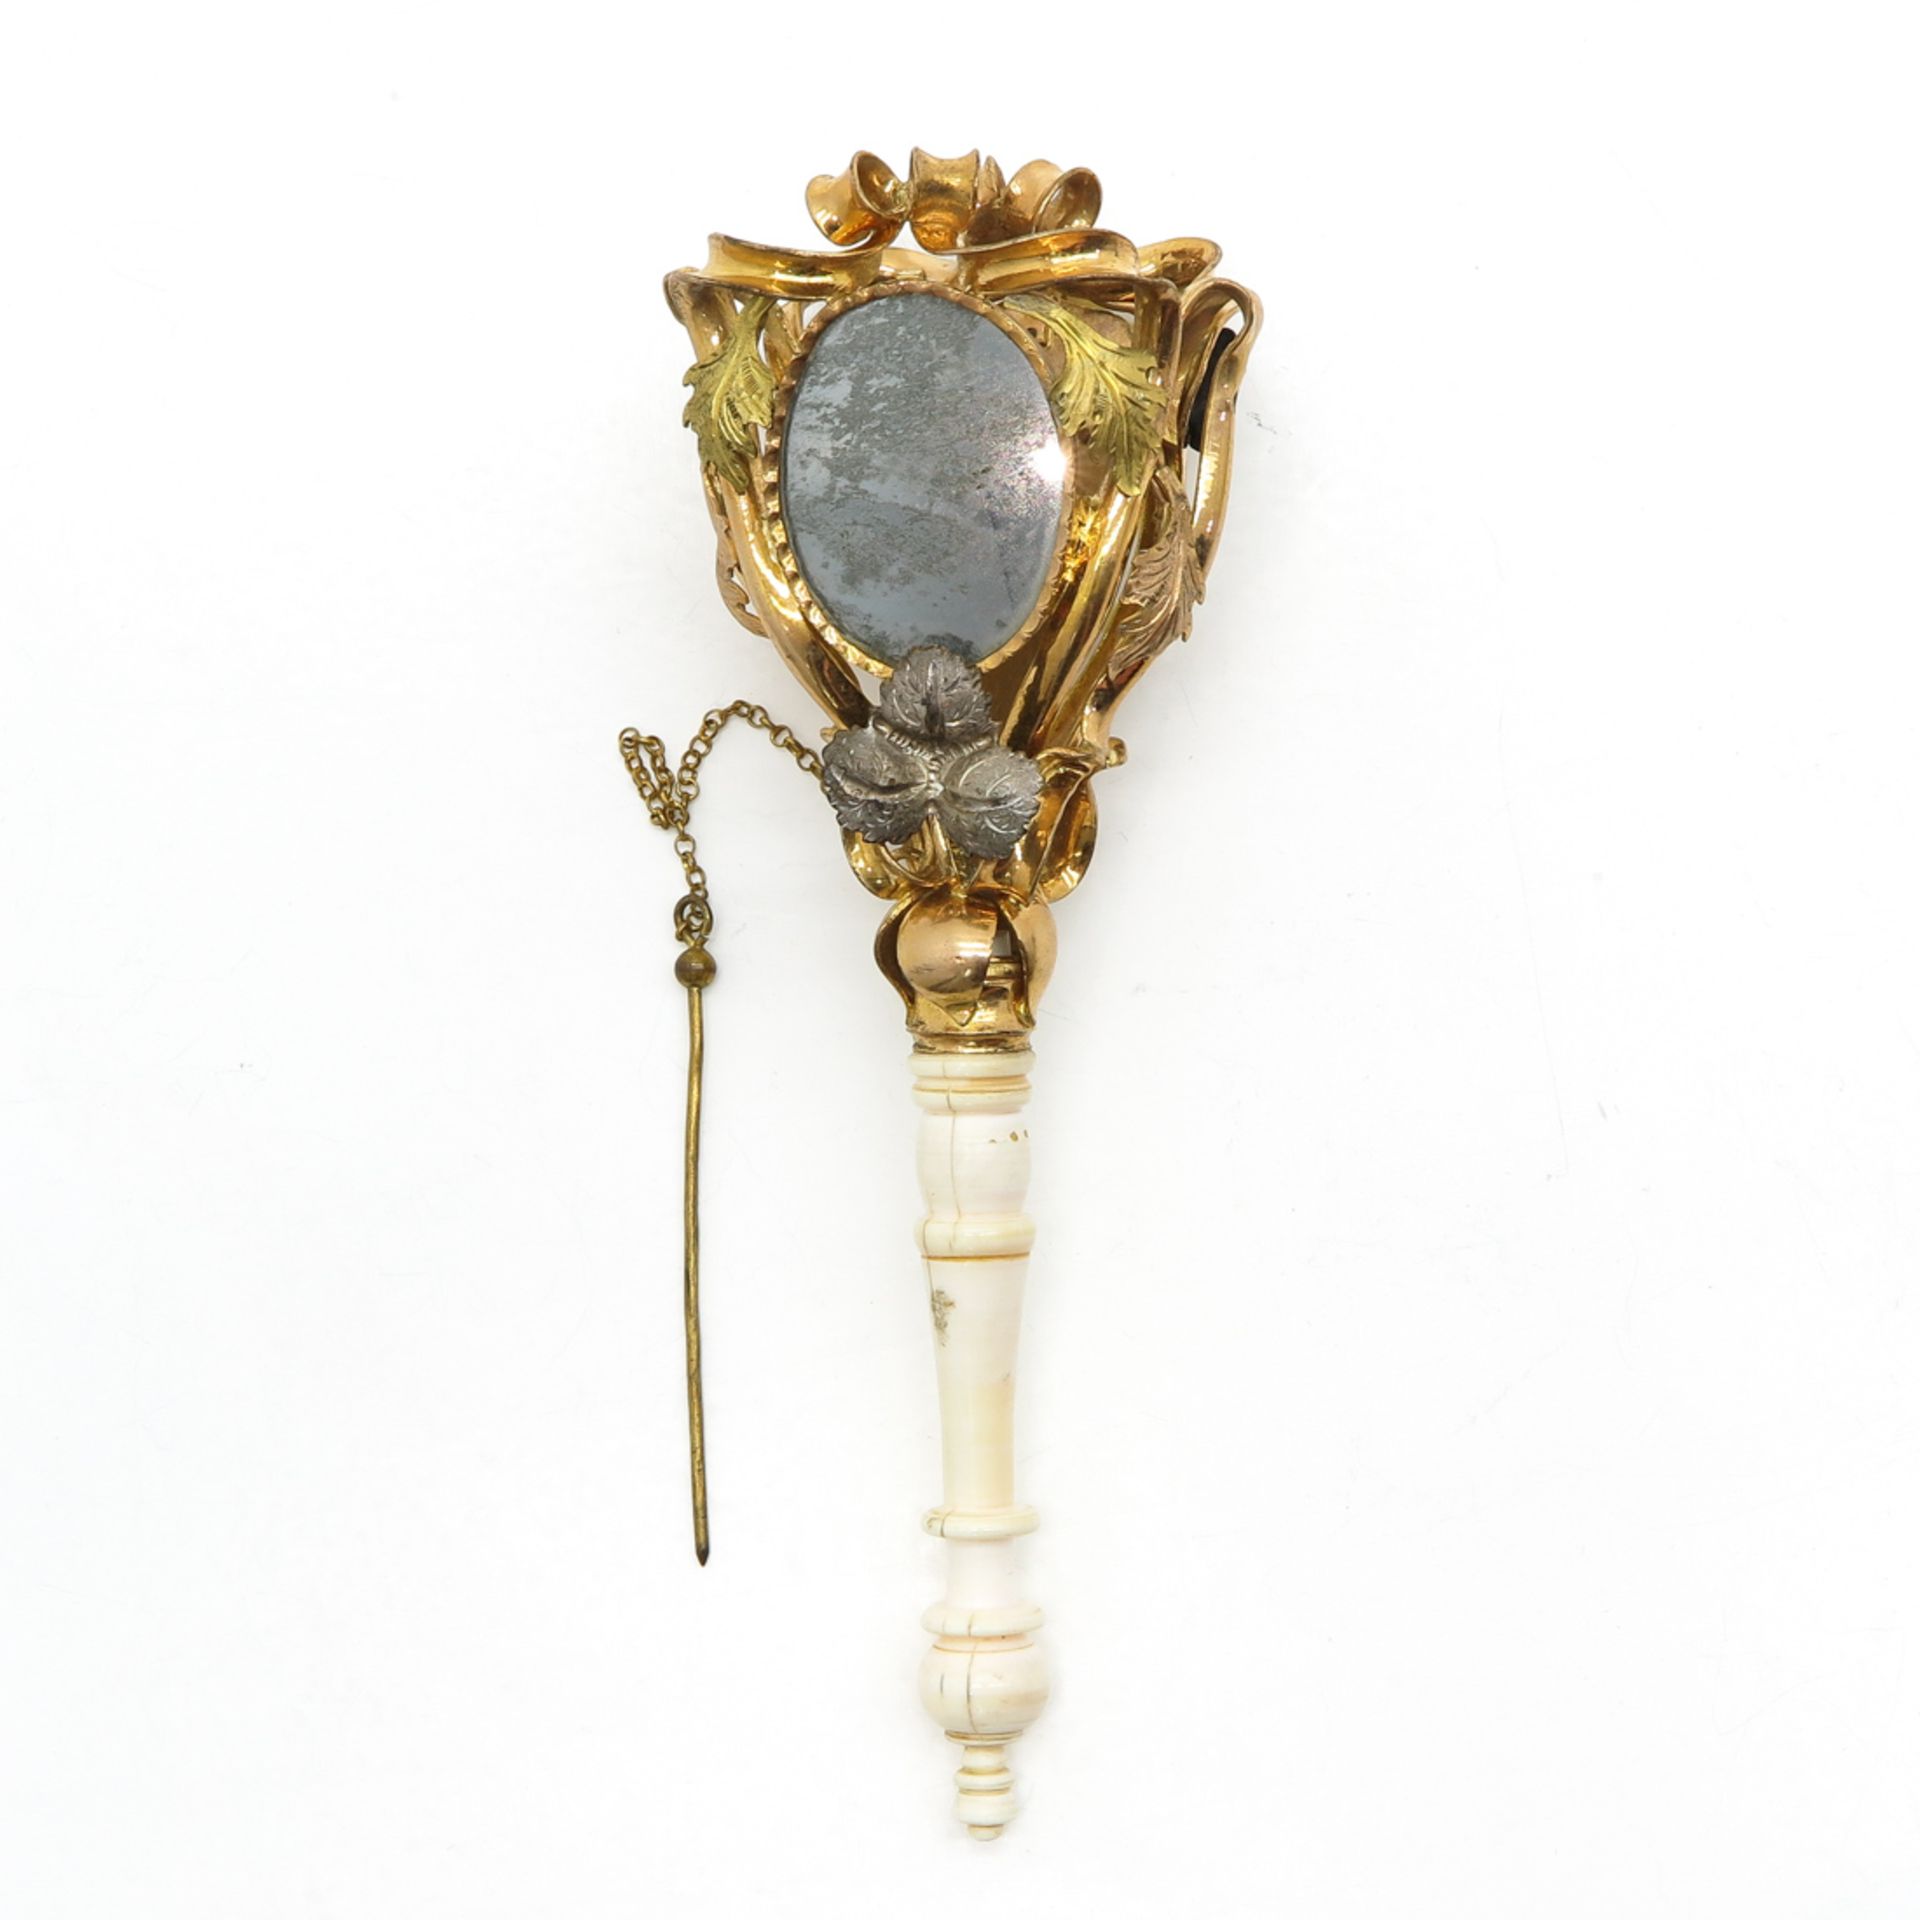 A Fine 19th Century French Ladies Accessory